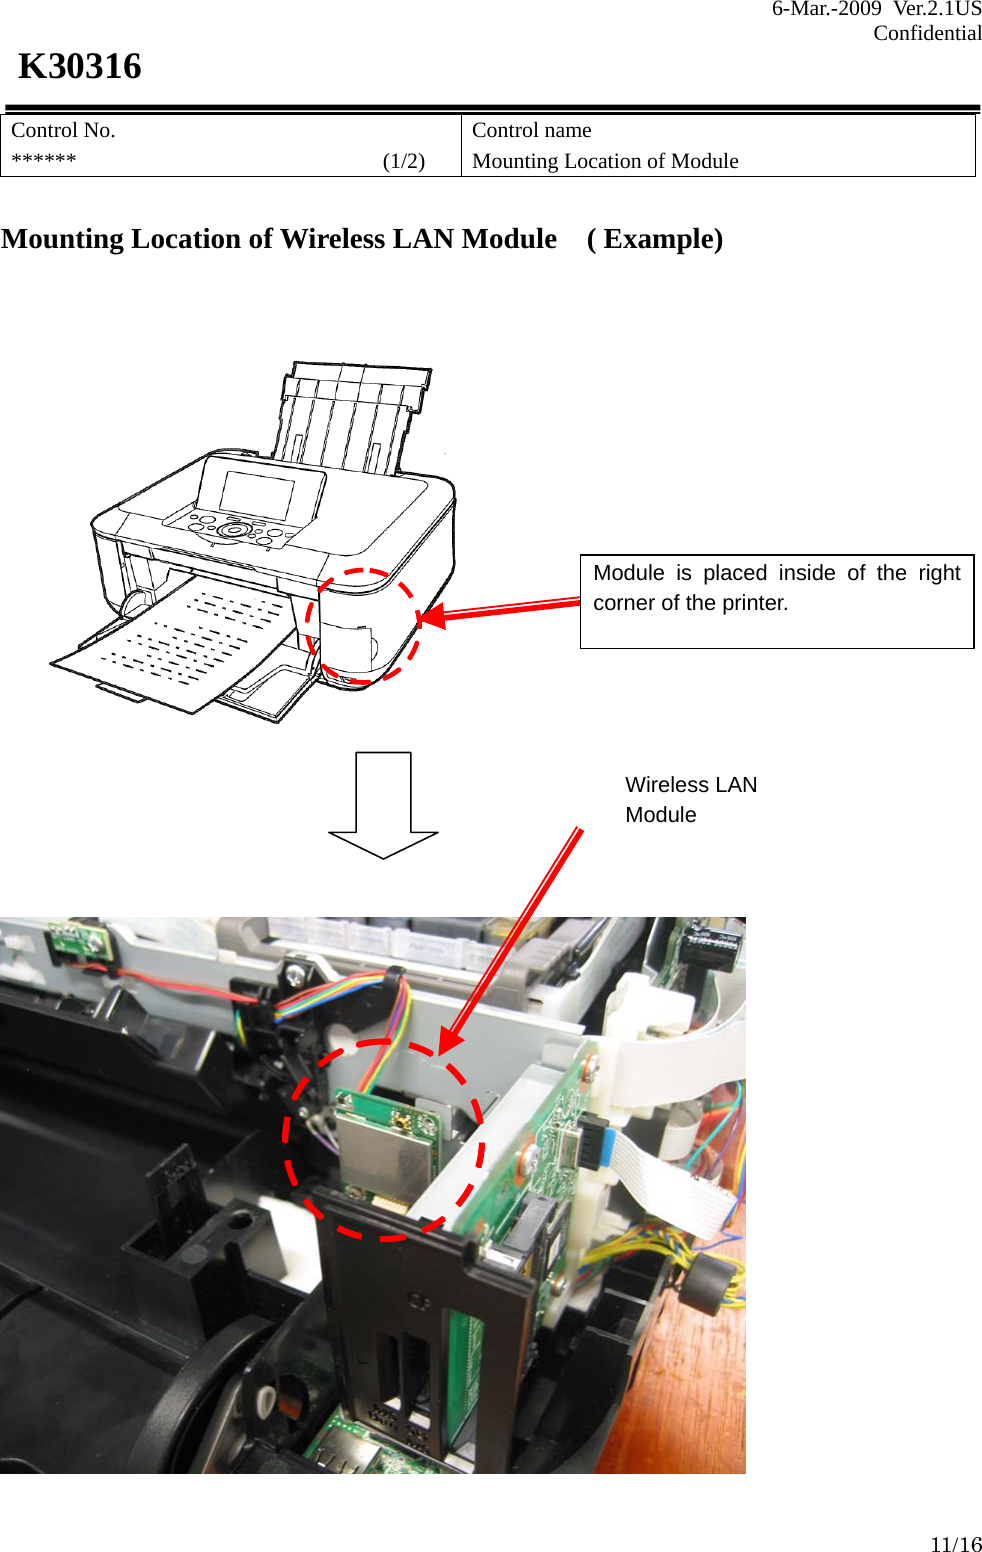 6-Mar.-2009 Ver.2.1US Confidential    11/16 K30316 Control No. ******                            (1/2) Control name Mounting Location of Module  Mounting Location of Wireless LAN Module ( Example)         Module is placed inside of the right corner of the printer. Wireless LAN Module 